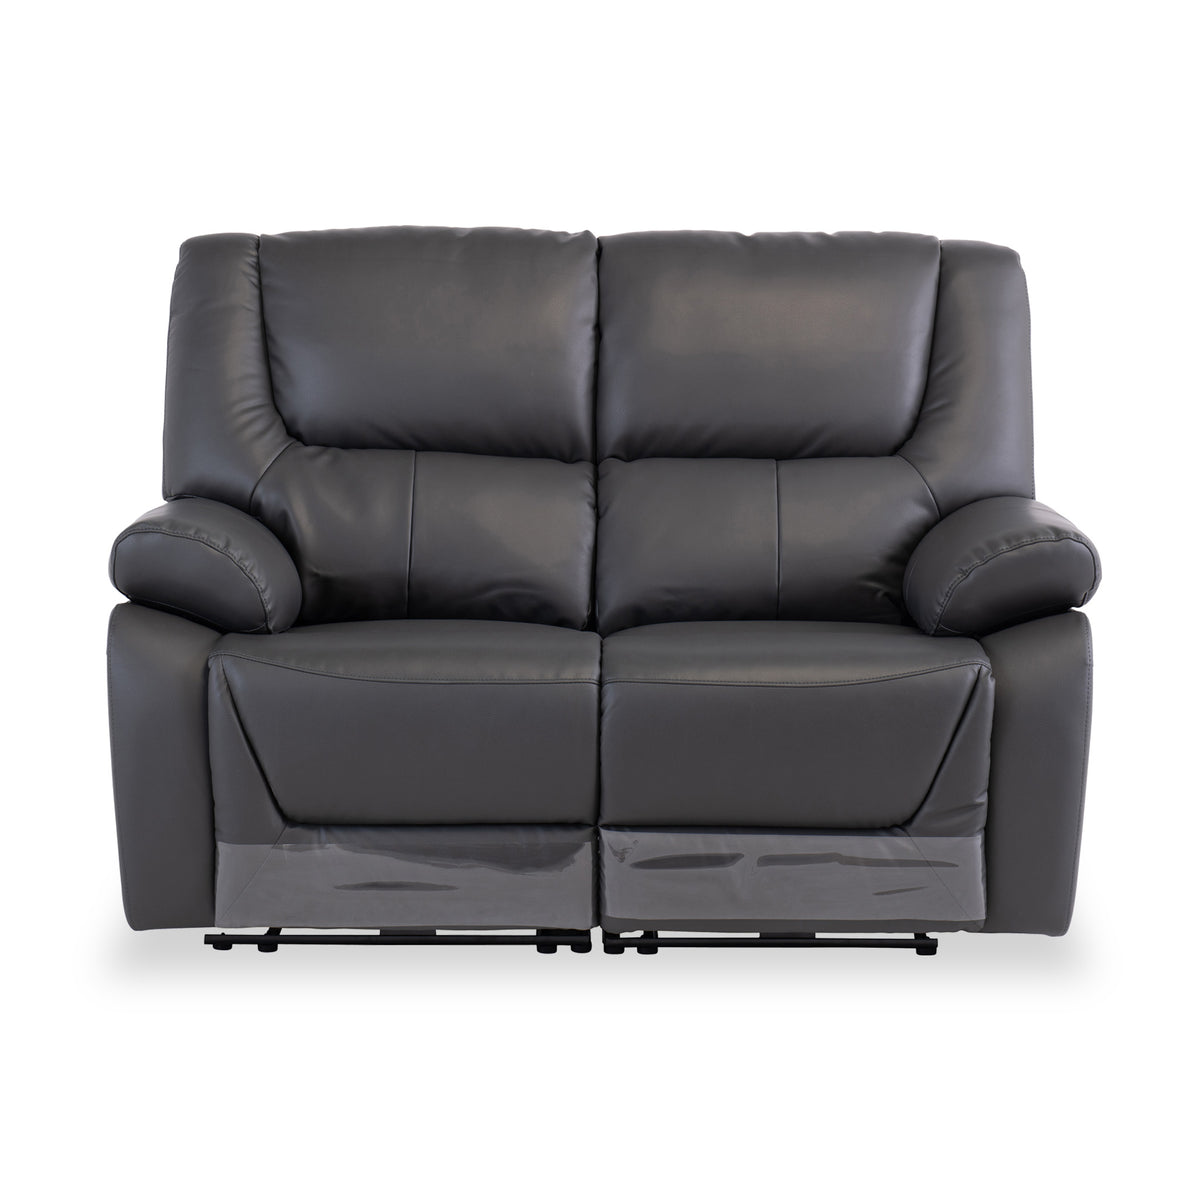 Baxter Leather Charcoal Electric Reclining 2 Seater Sofa from Roseland Furniture